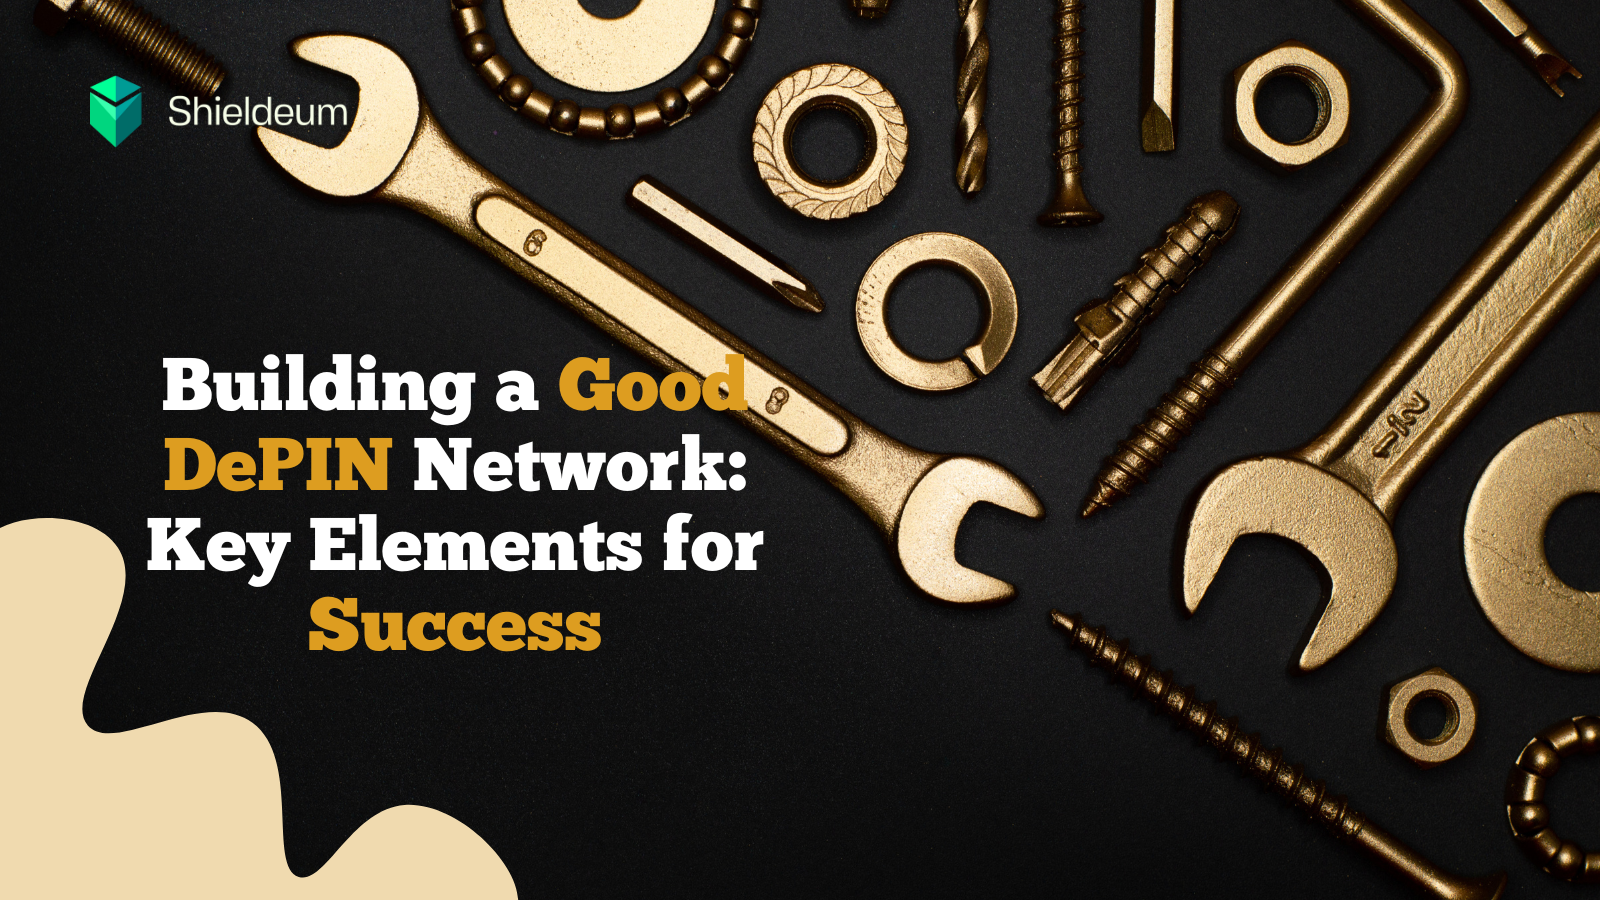 Building a Good DePIN Network: Key Elements for Success